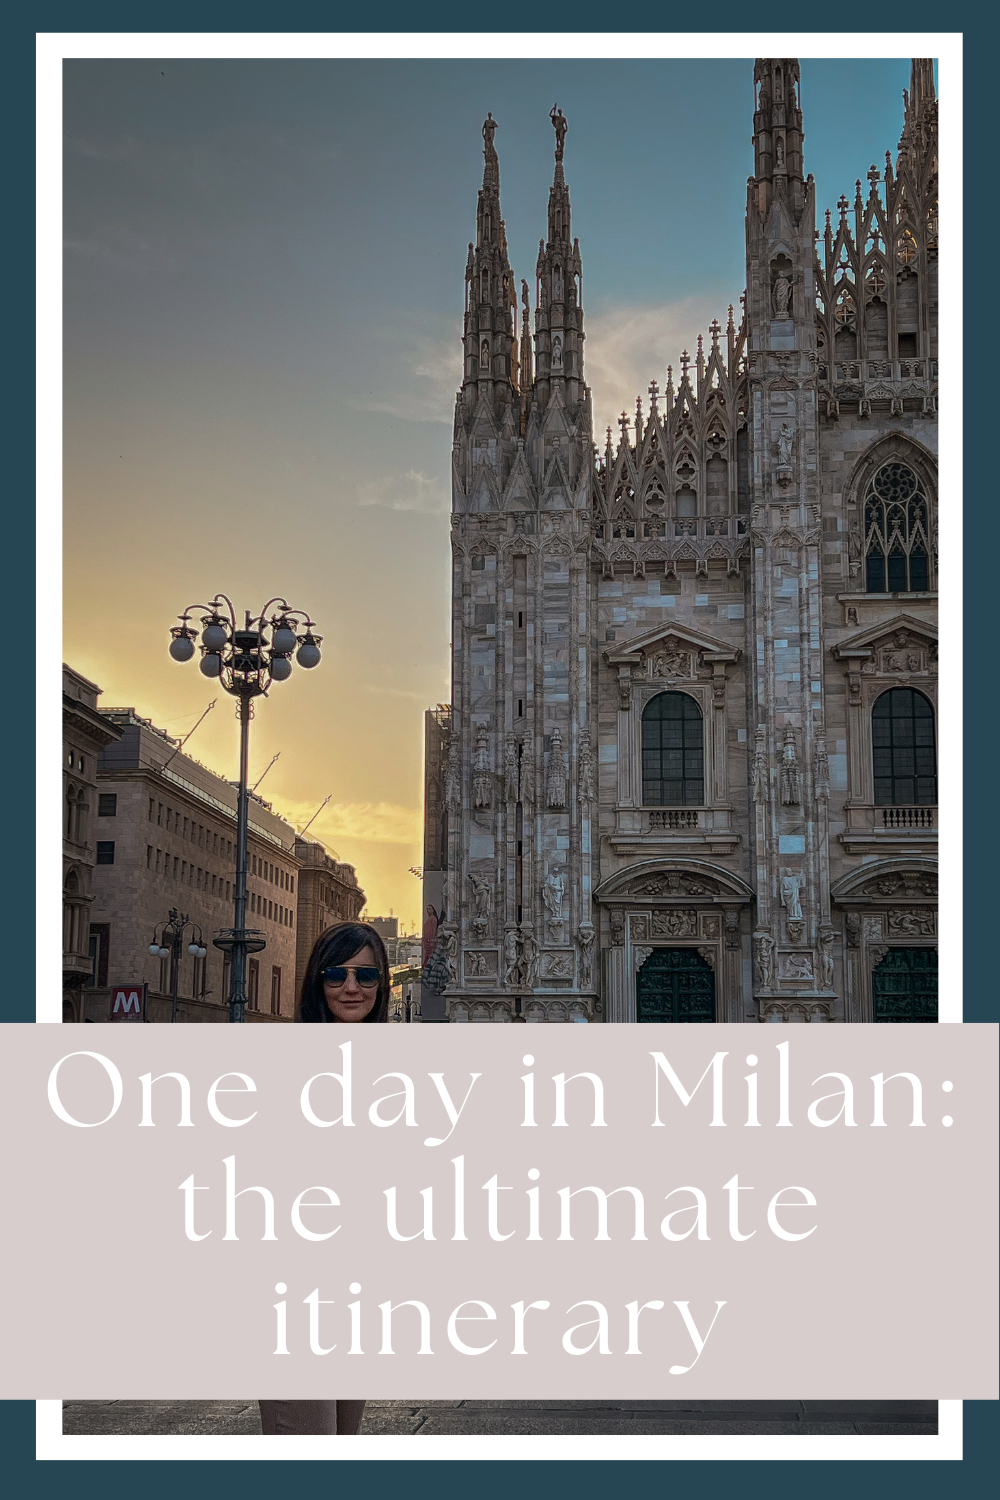 One day in Milan by My Next Pin